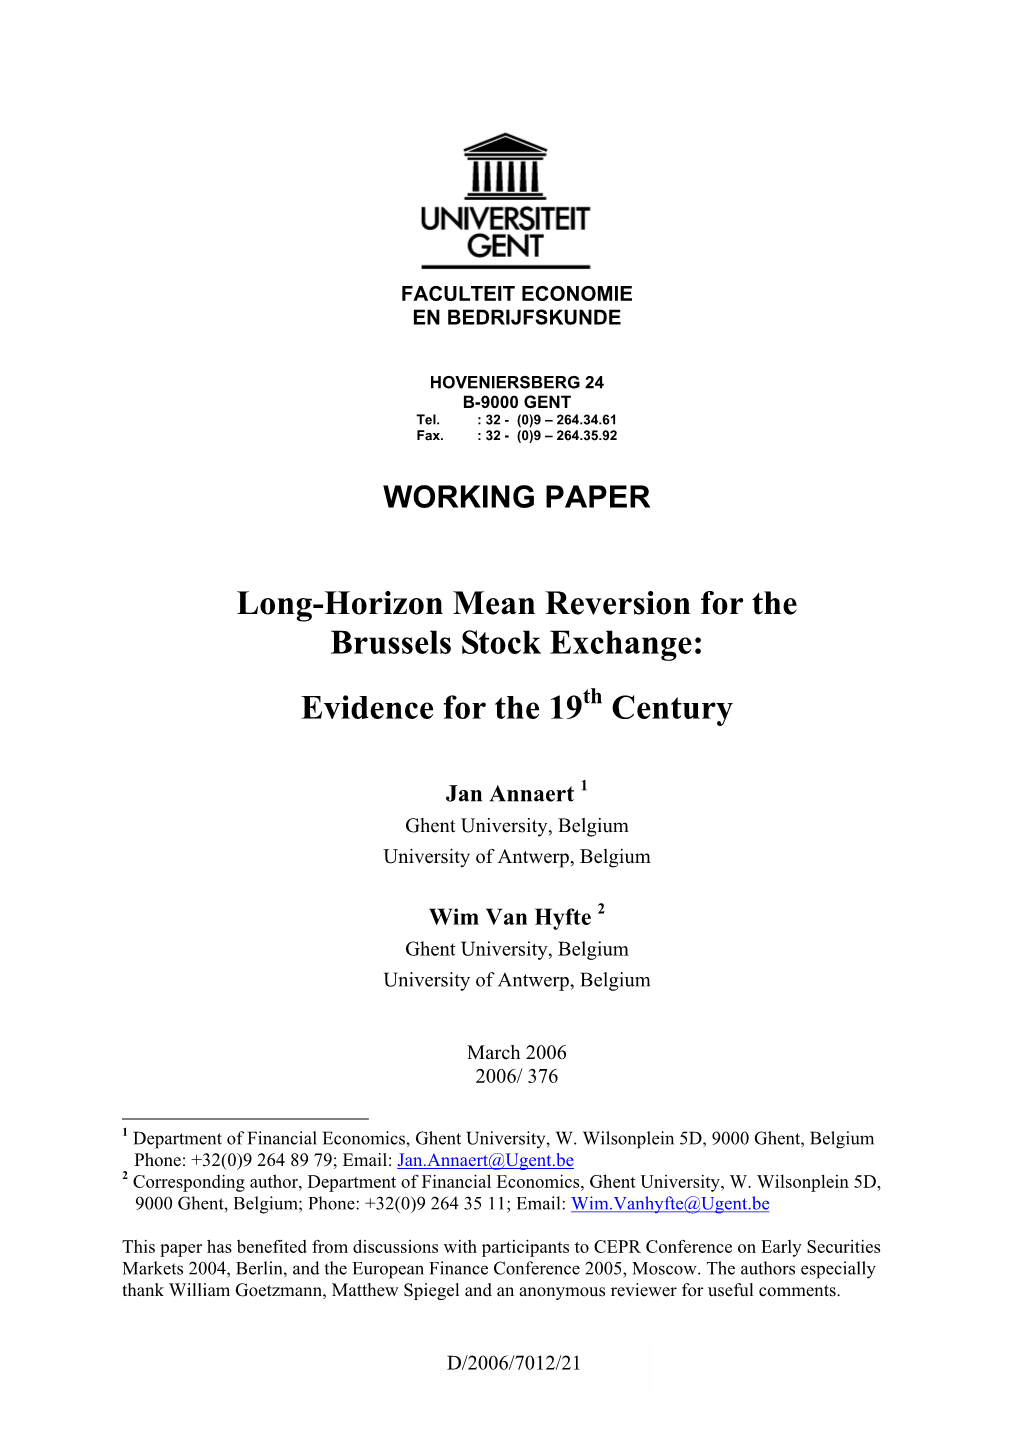 Long-Horizon Mean Reversion for the Brussels Stock Exchange: Evidence for the 19Th Century